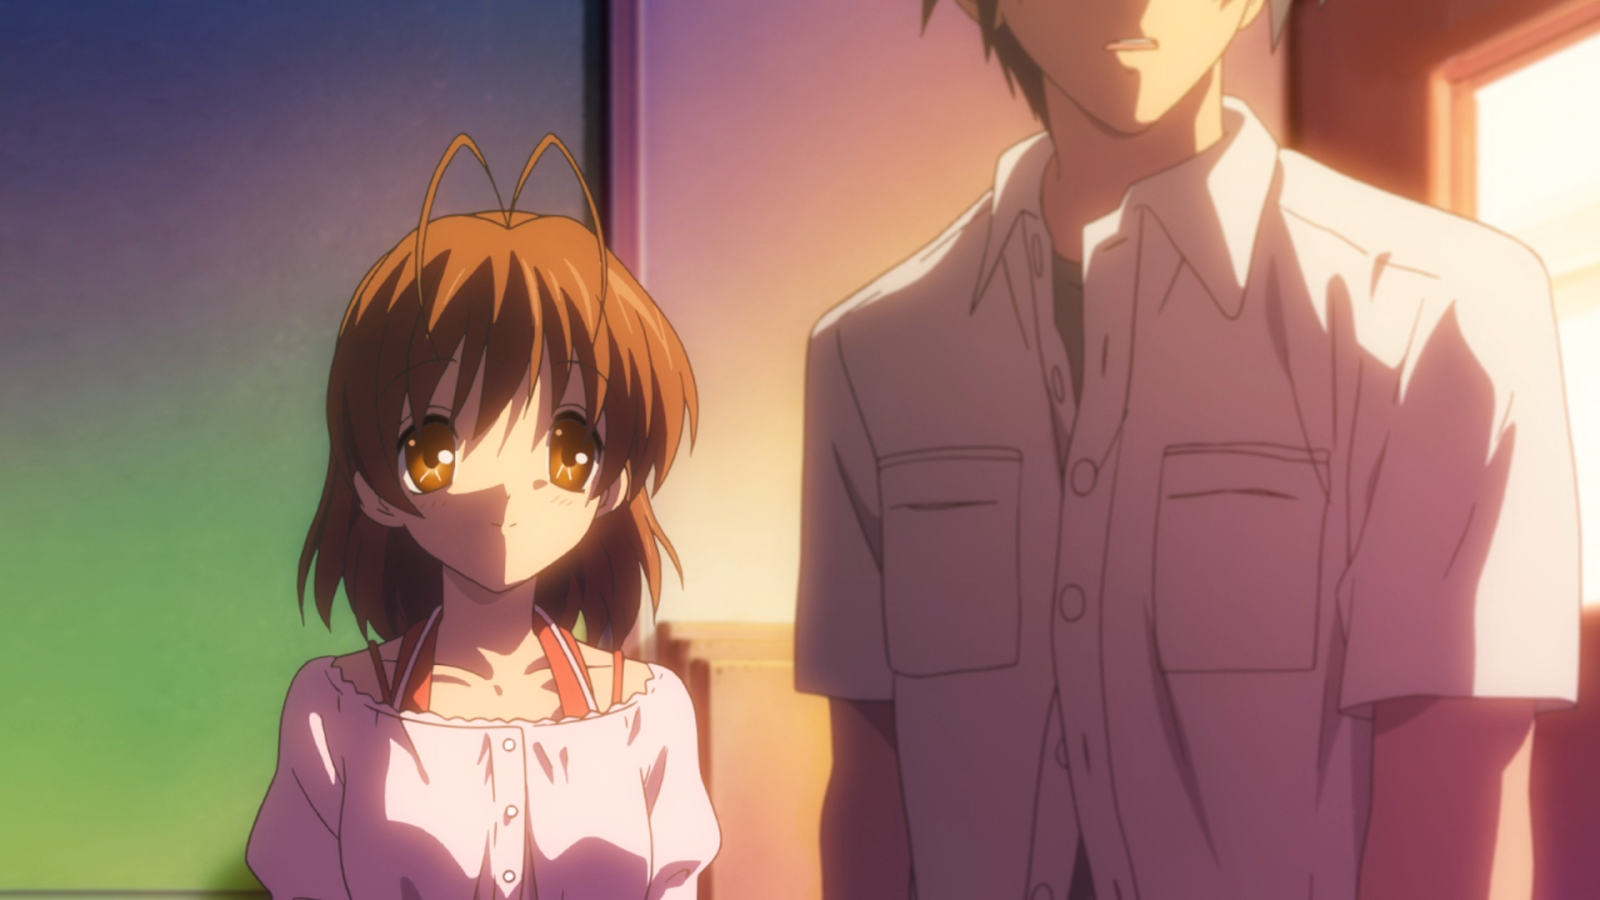 Anime Analysis: Clannad + Clannad: After Story